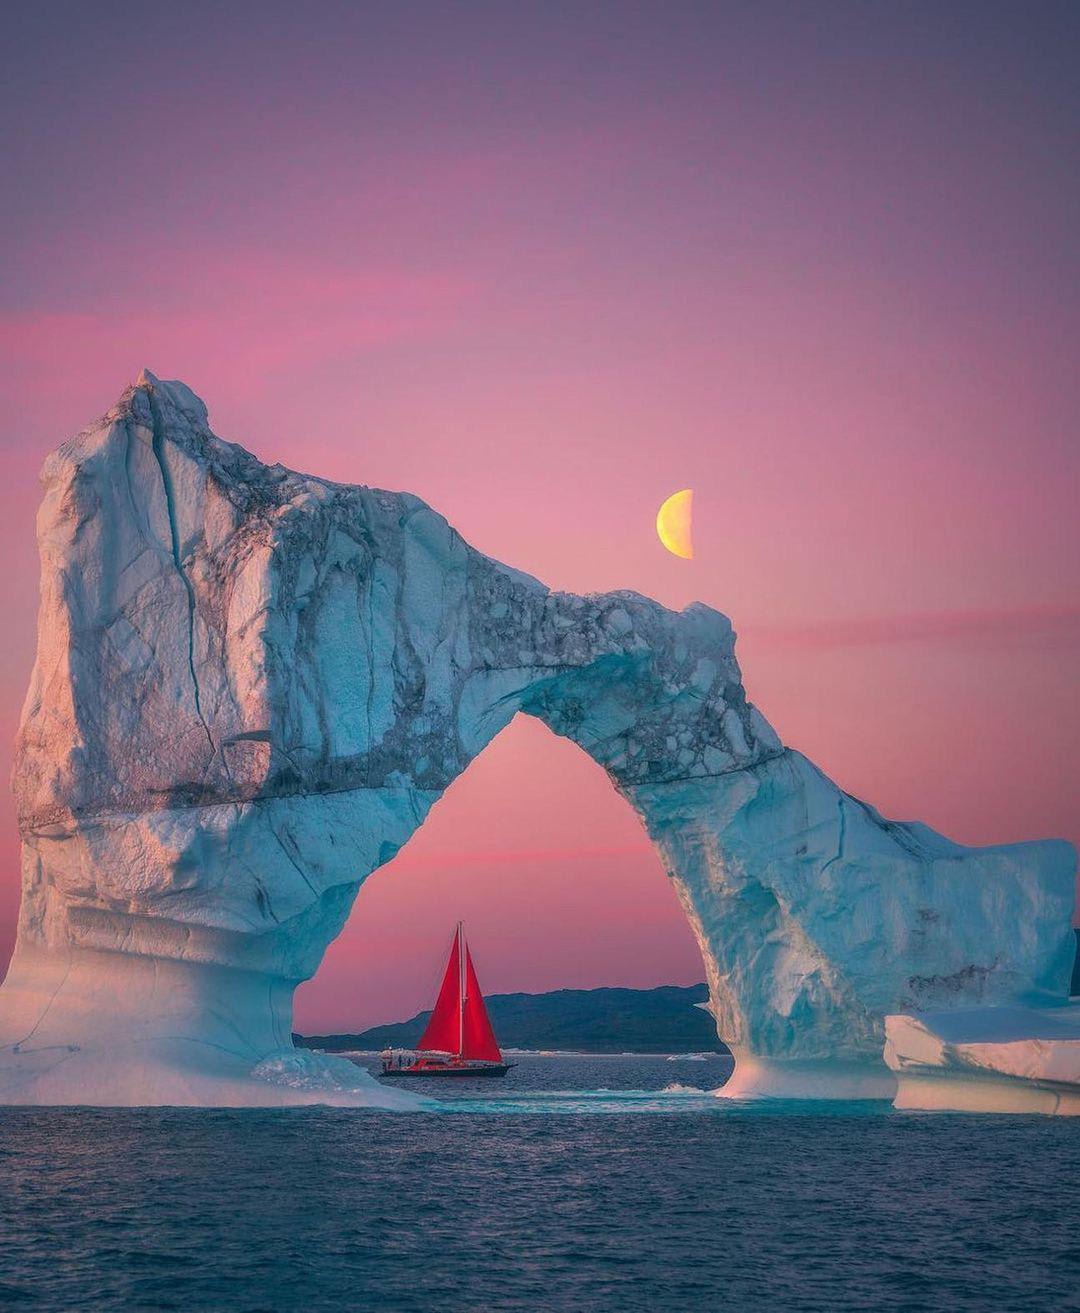 Greenland’s natural formations